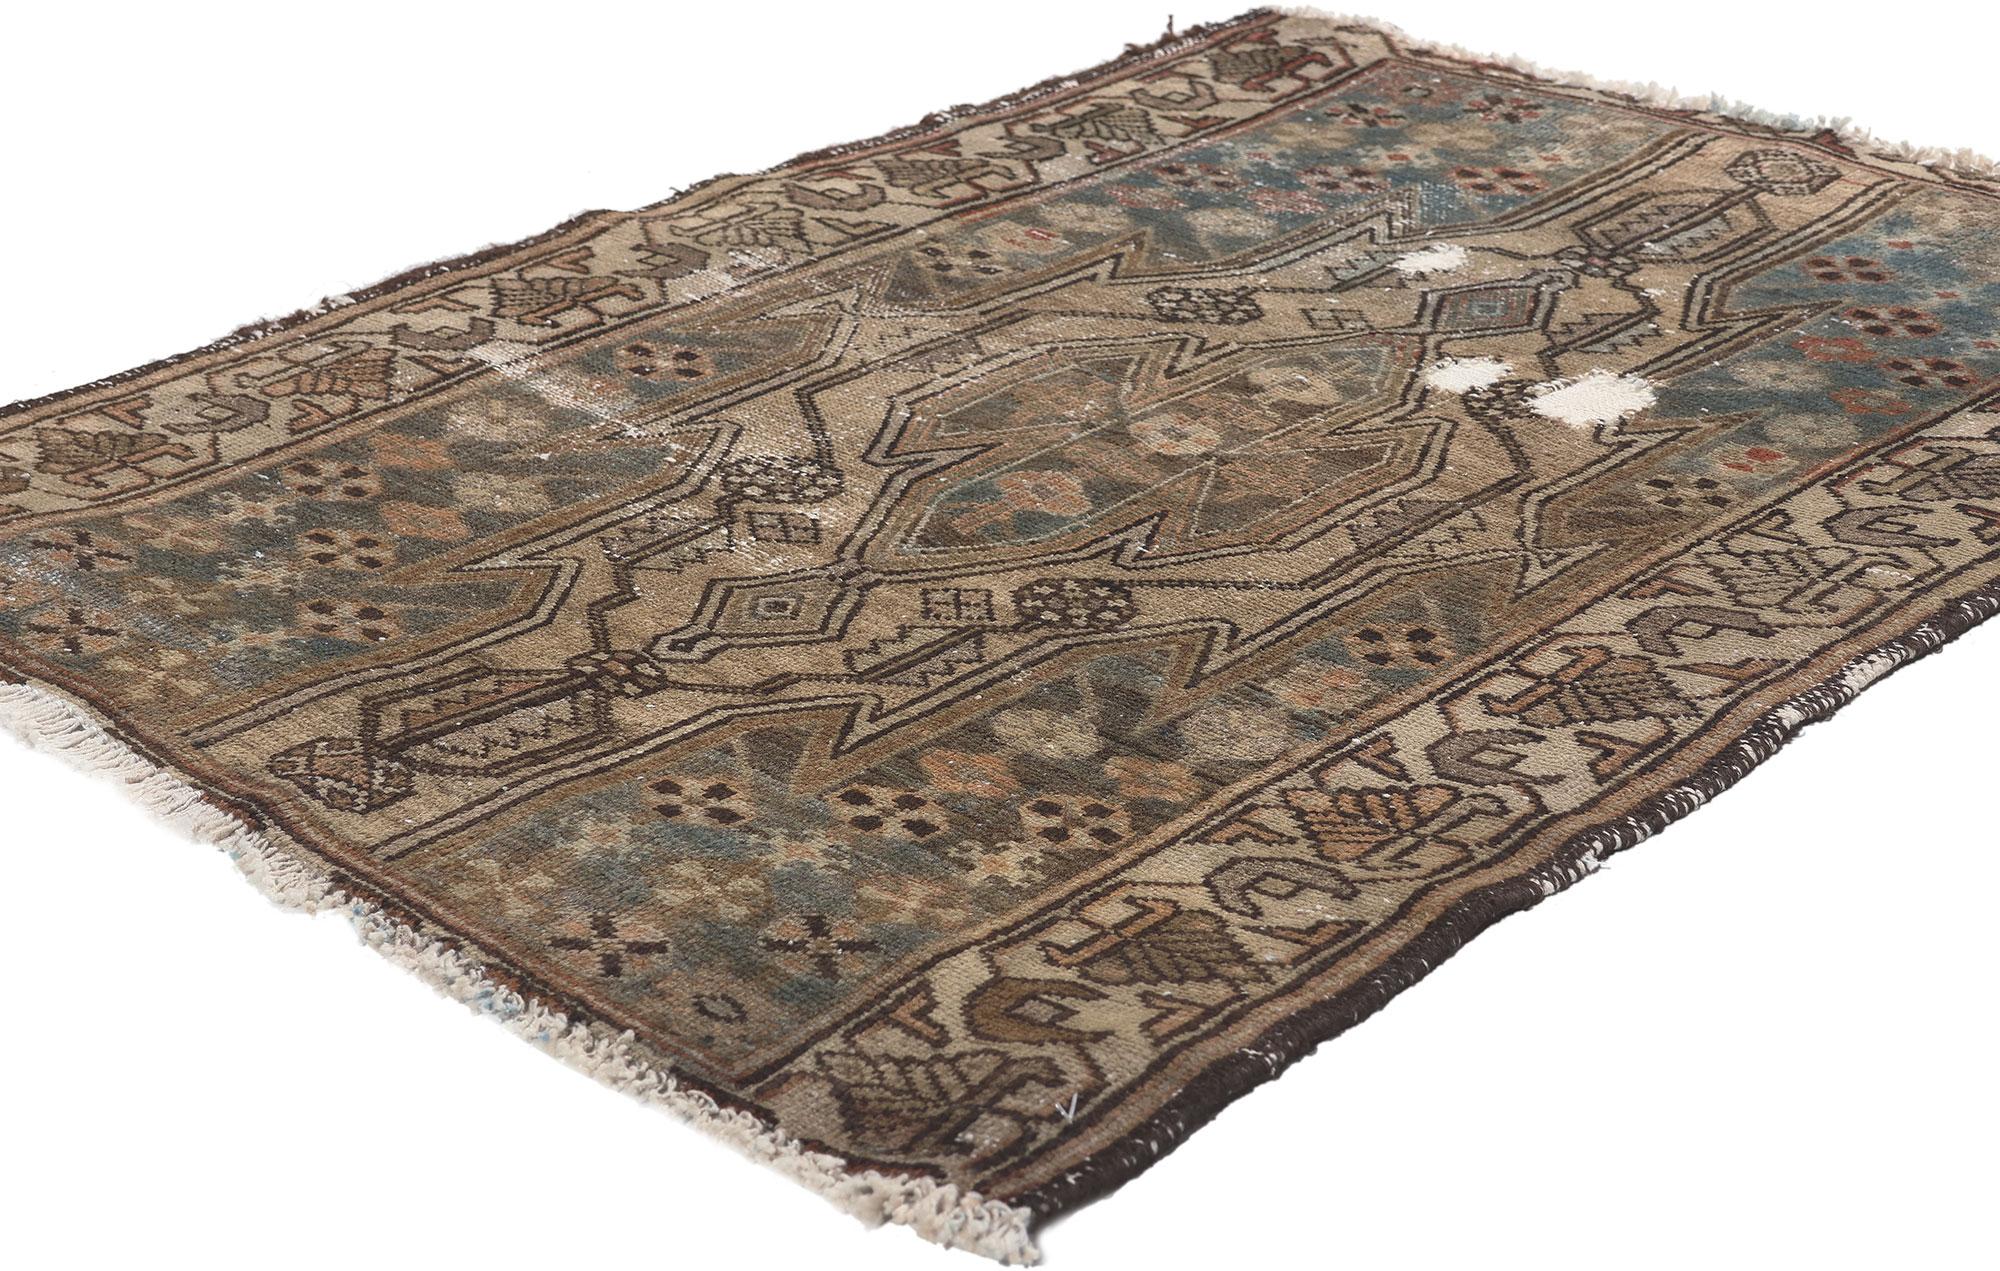 78581 Antique Worn Persian Hamadan Rug, 02'06 x 03'06. 
Weathered finesse meets rustic sensibility in this distressed vintage Persian Hamadan rug. The rugged tribal pattern and earthy colorway woven into this piece work together creating rustic yet